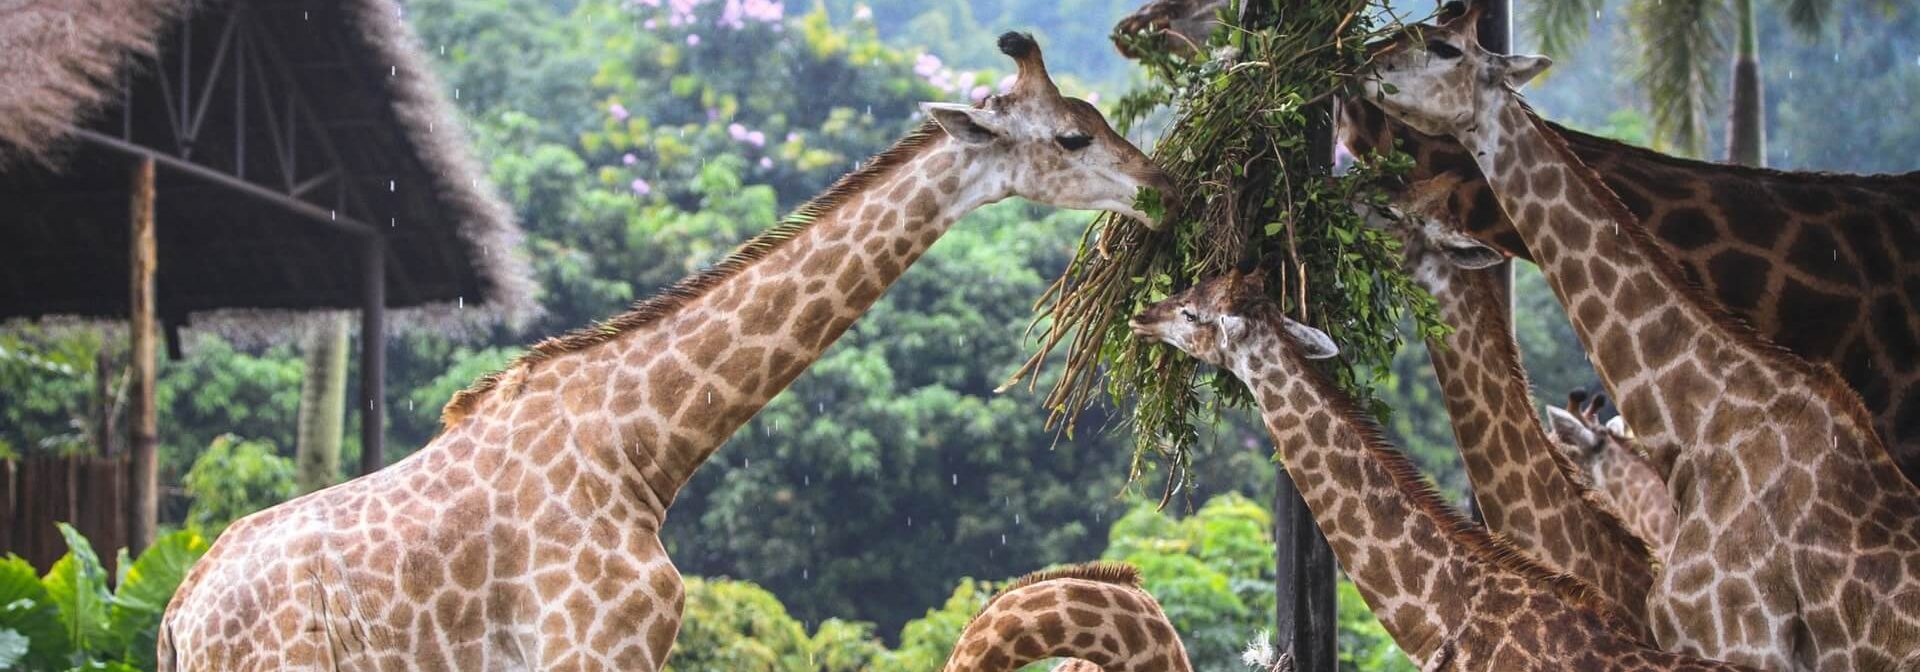 Photo of giraffes which are cared for by someone in the zoology career